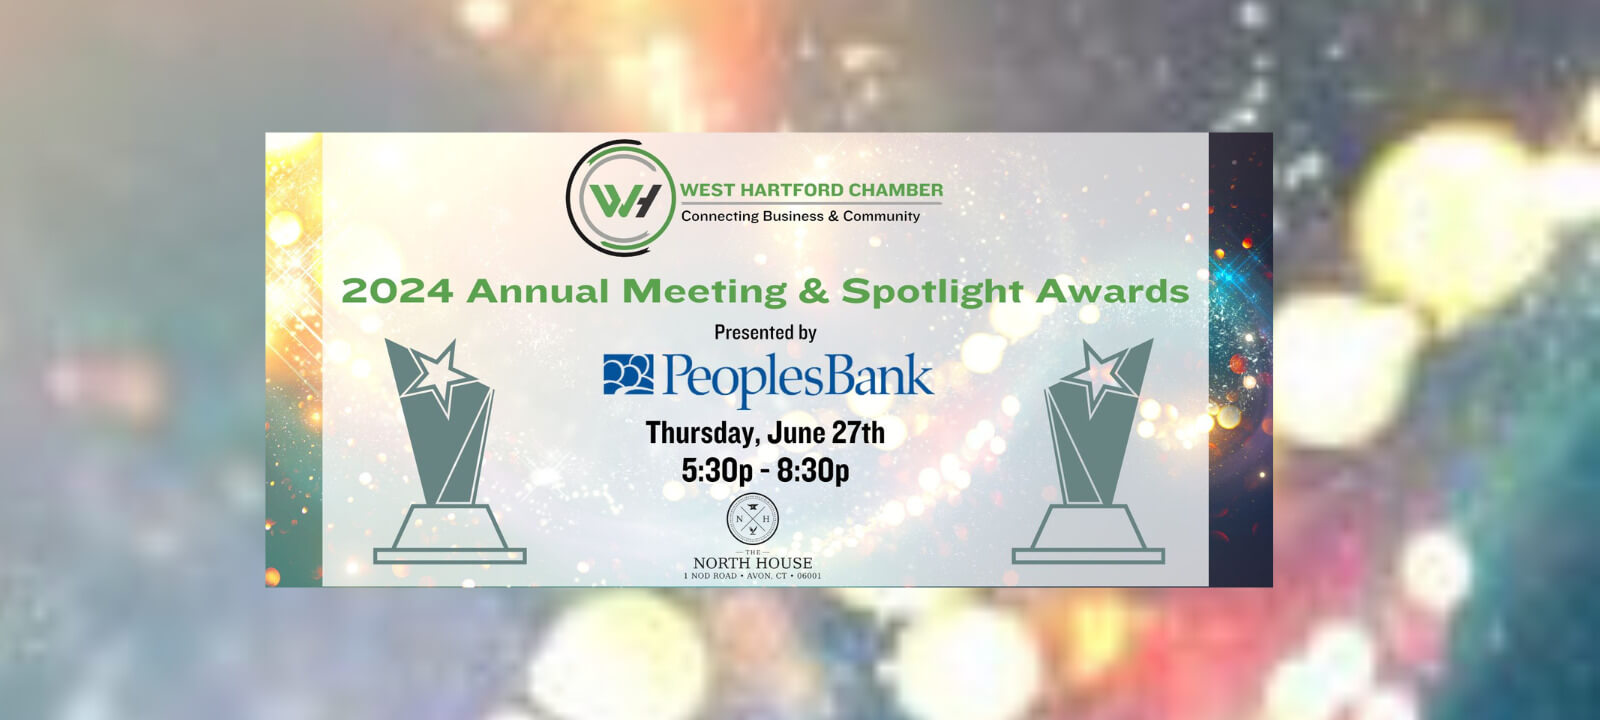 West Hartford Chamber 2024 Annual Meeting and Spotlight Awards